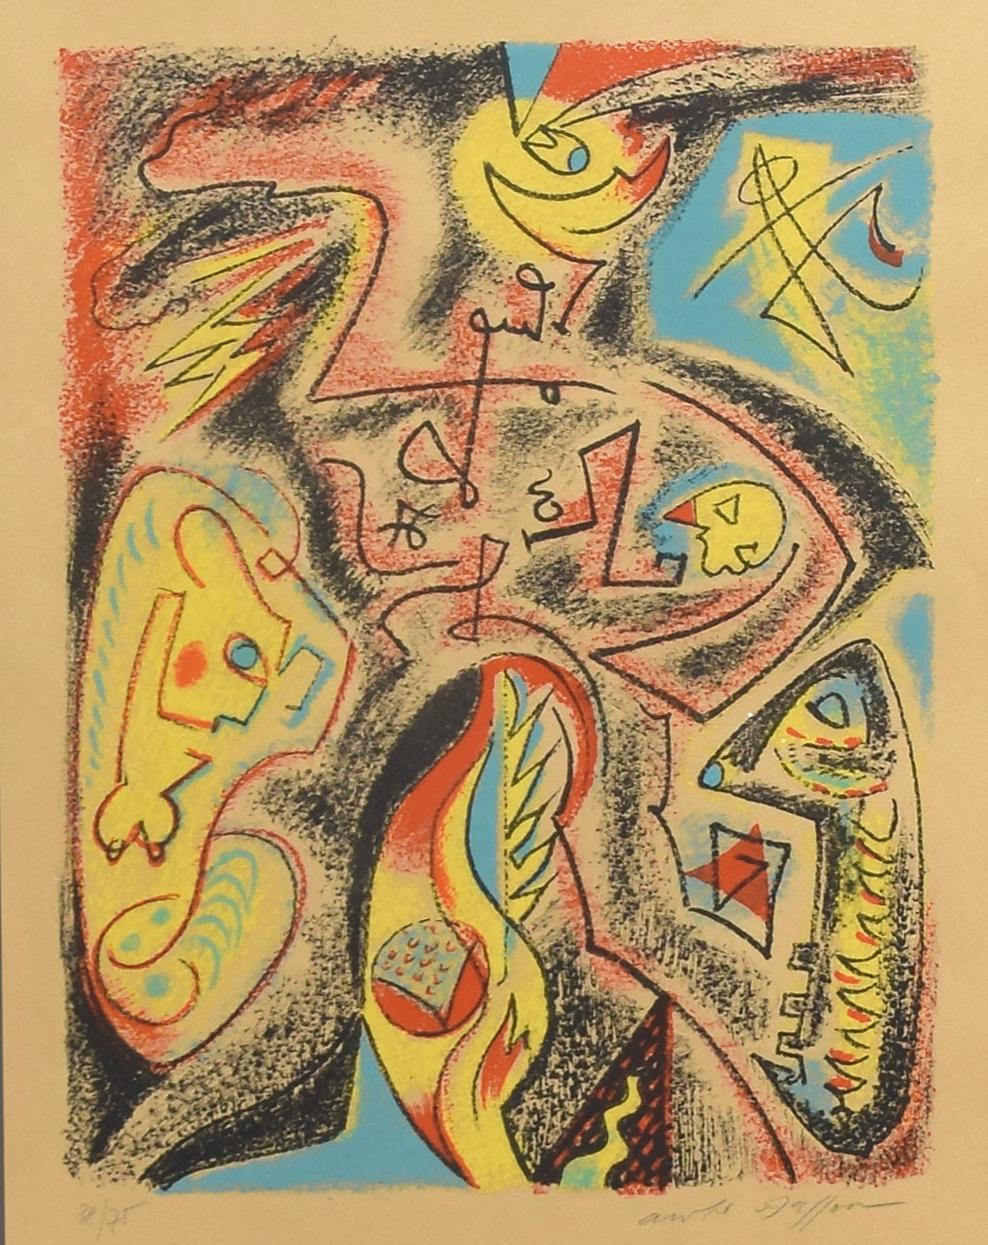 Abstract Composition is an original colored lithograph realized in the half of XX century.

The artwork is hand signed on the lower right margin.

Numbered on the lower left. Edition 38/75

Includes frame: 65 x 3 x 48.5 cm 

André Masson